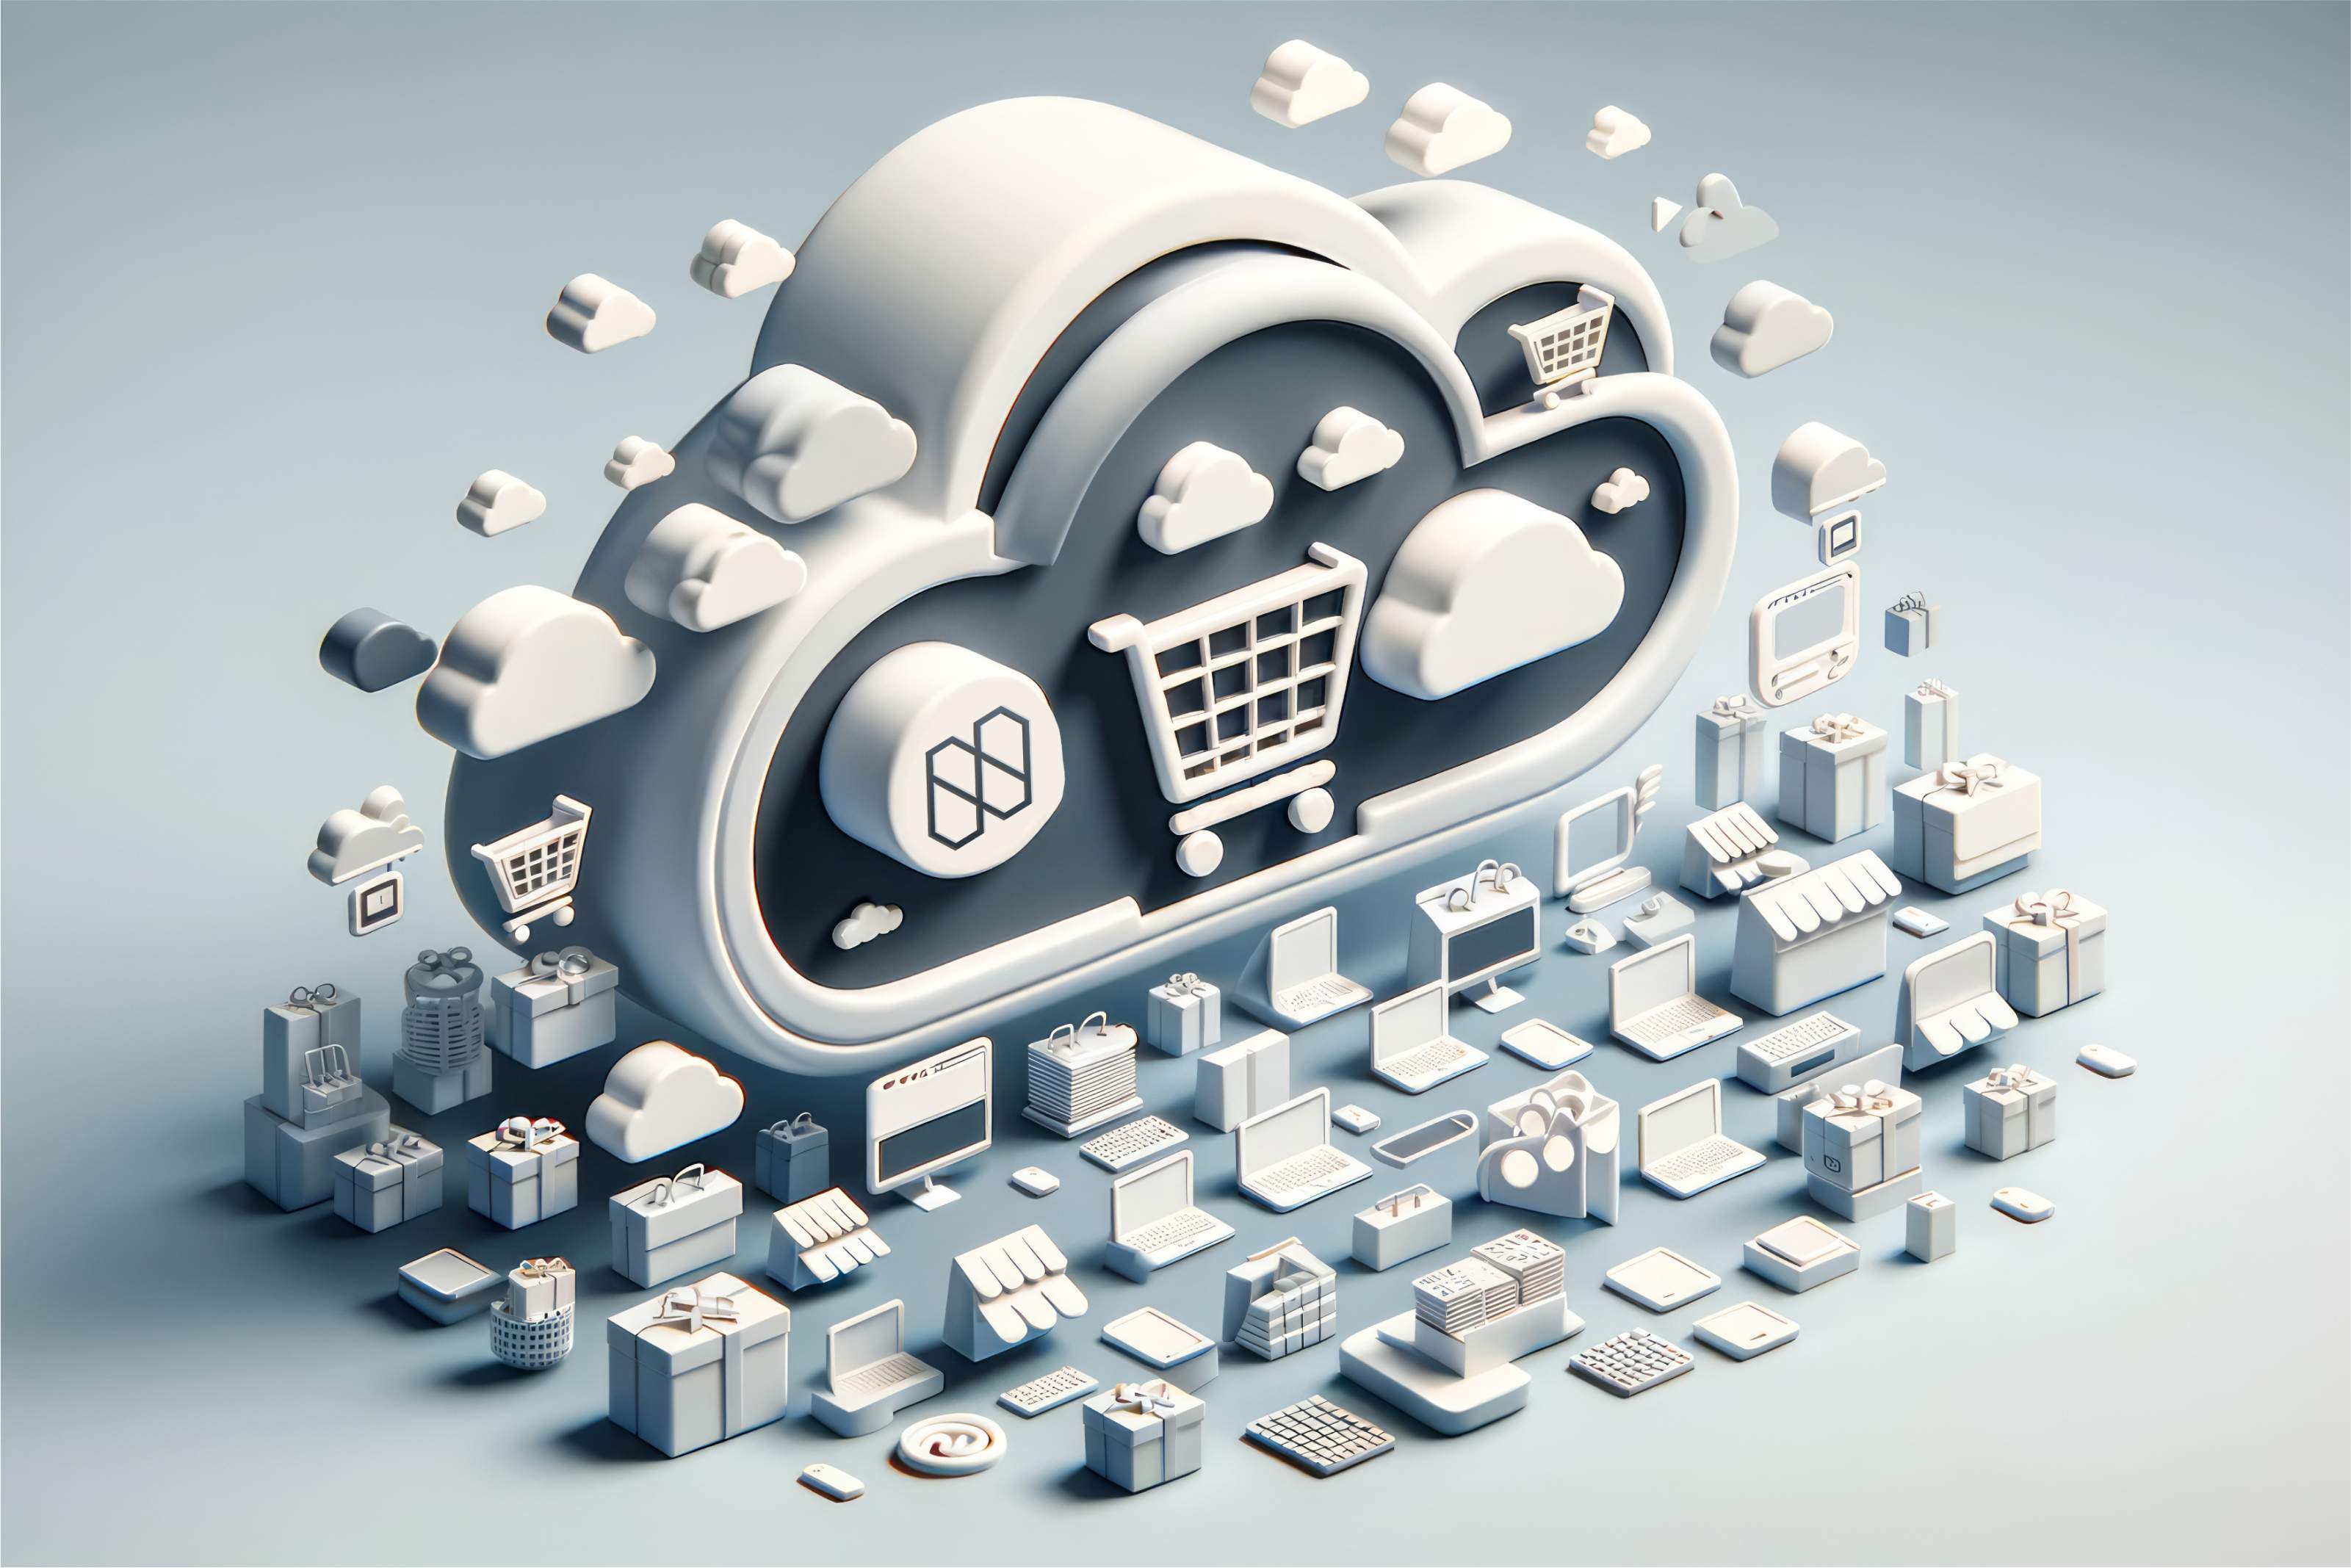 Cloud marketplaces and BYOC